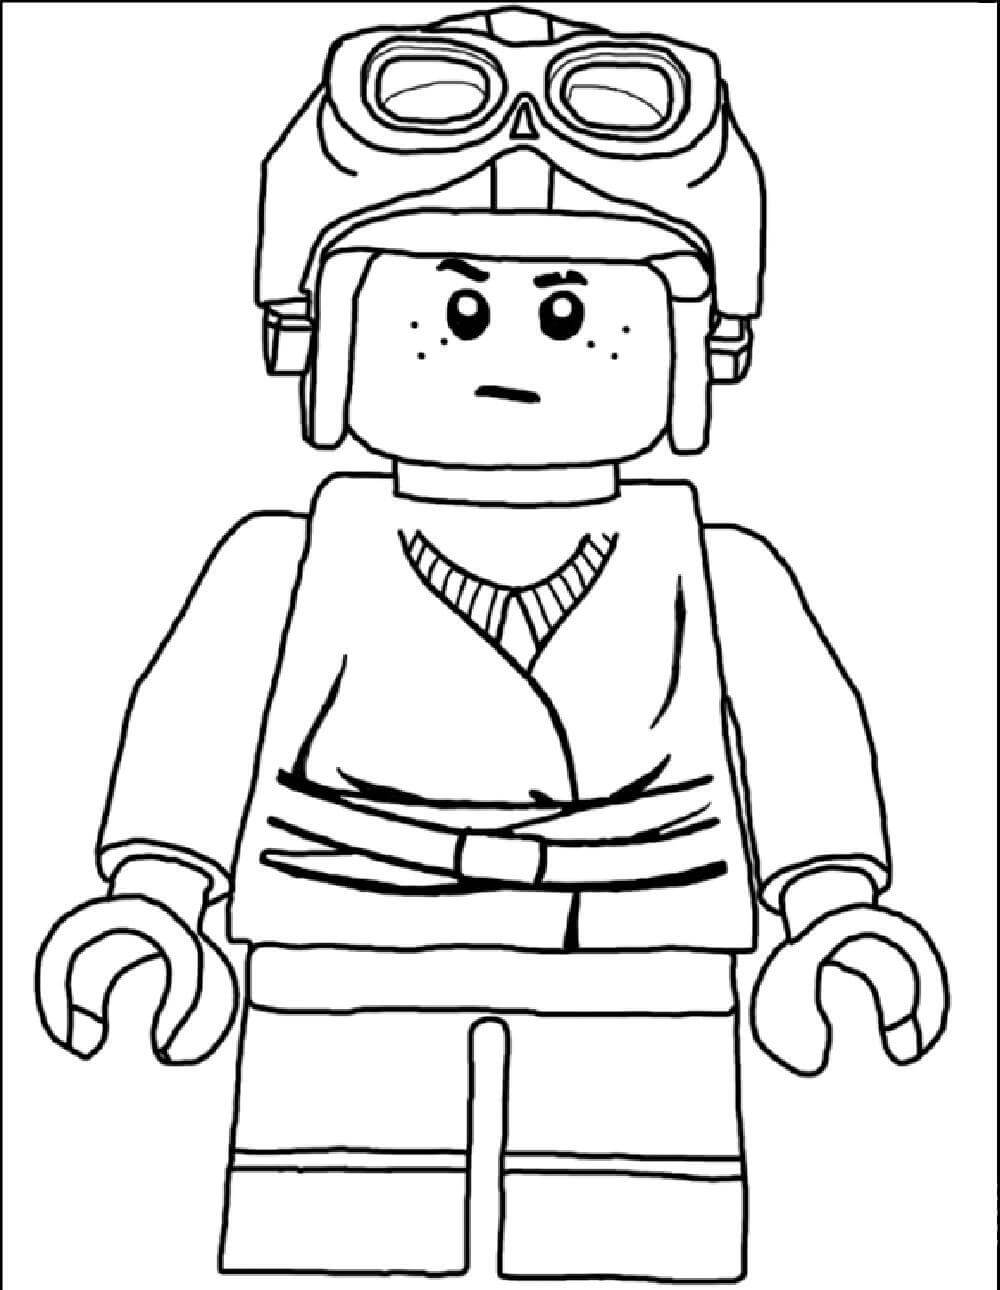 Lego Star Wars Pilot Coloring Page